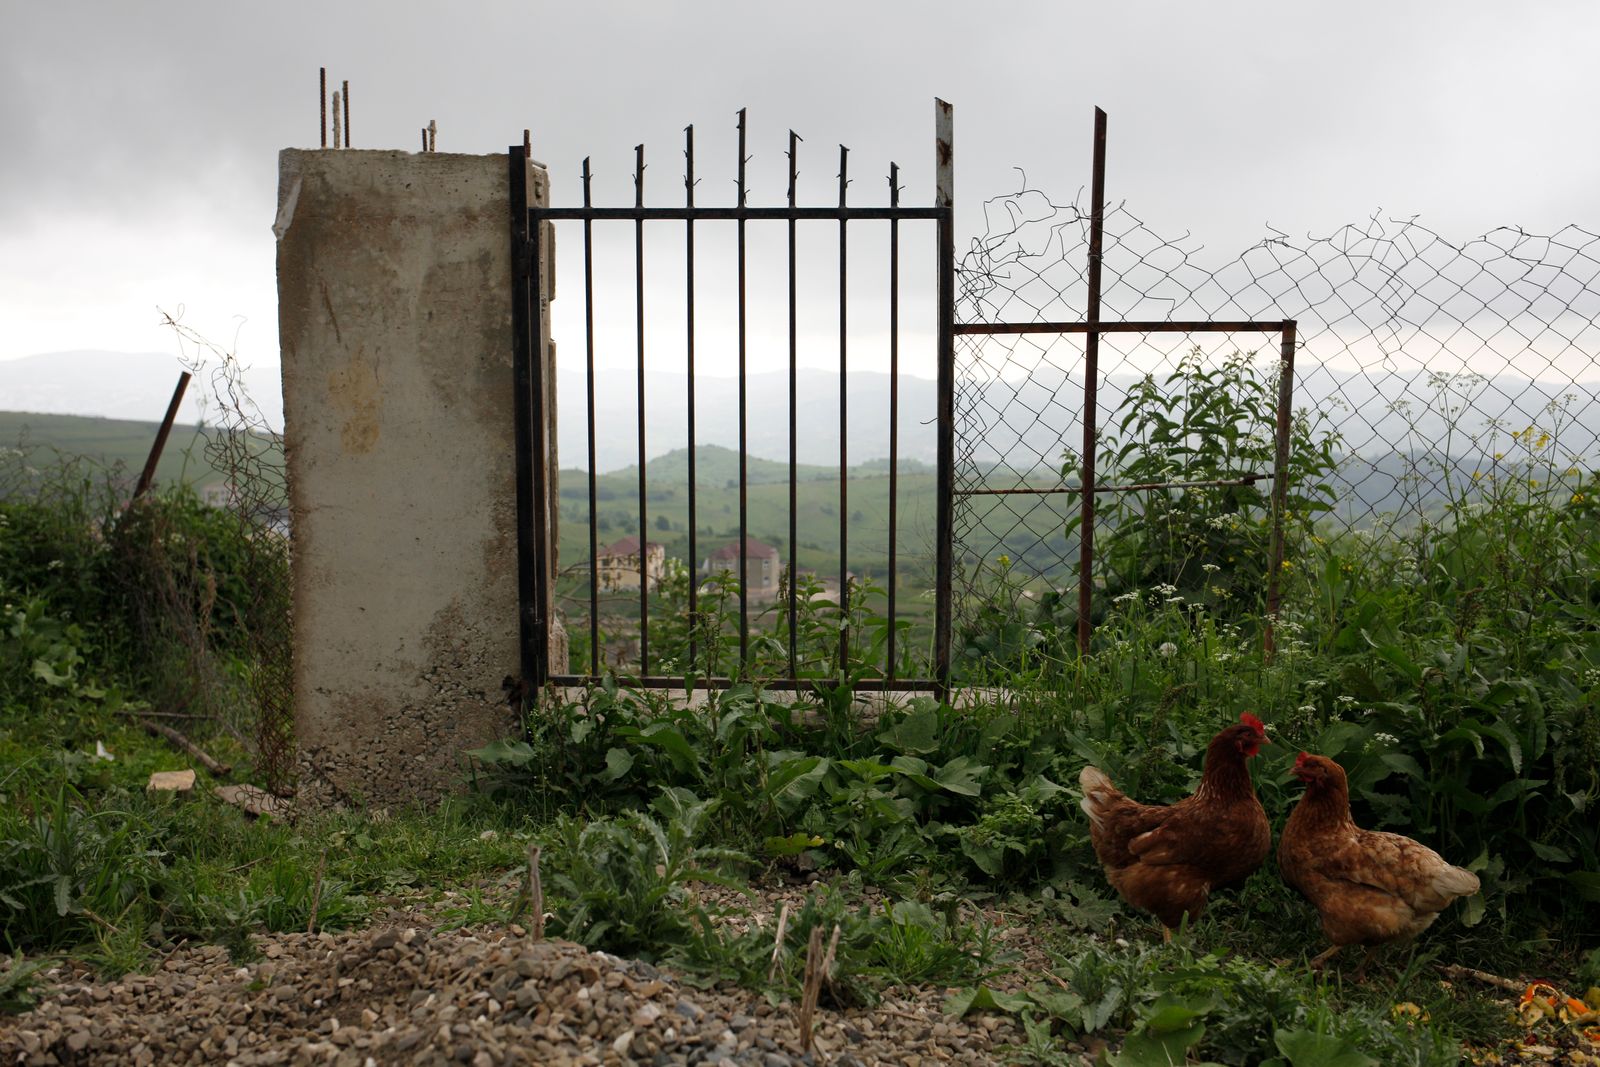 © EDUARD KORNIYENKO - Chickens are seen next to a fence in the village of Kubachi, Dagestan.